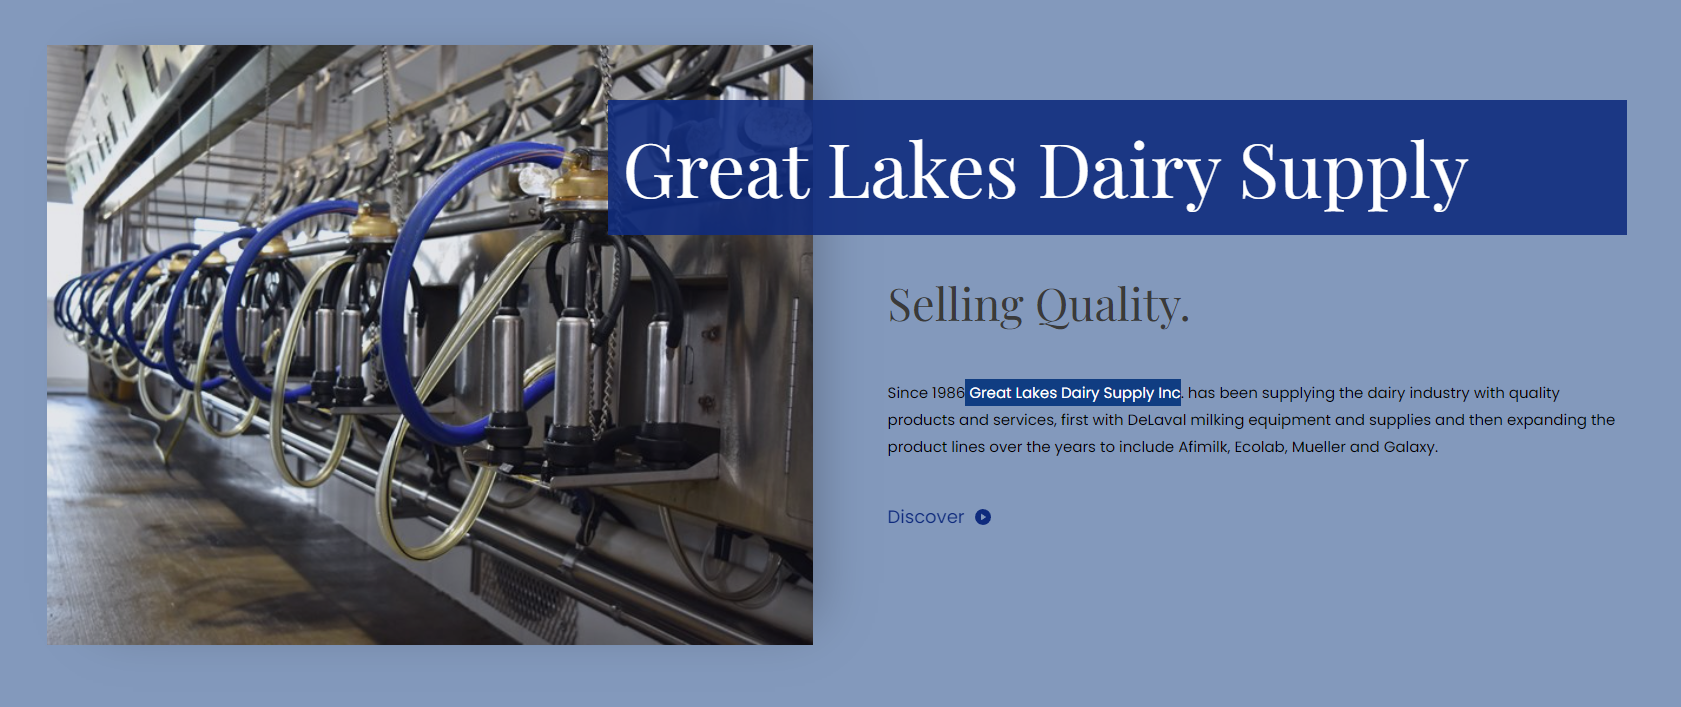 Great Lakes Dairy Supply Inc